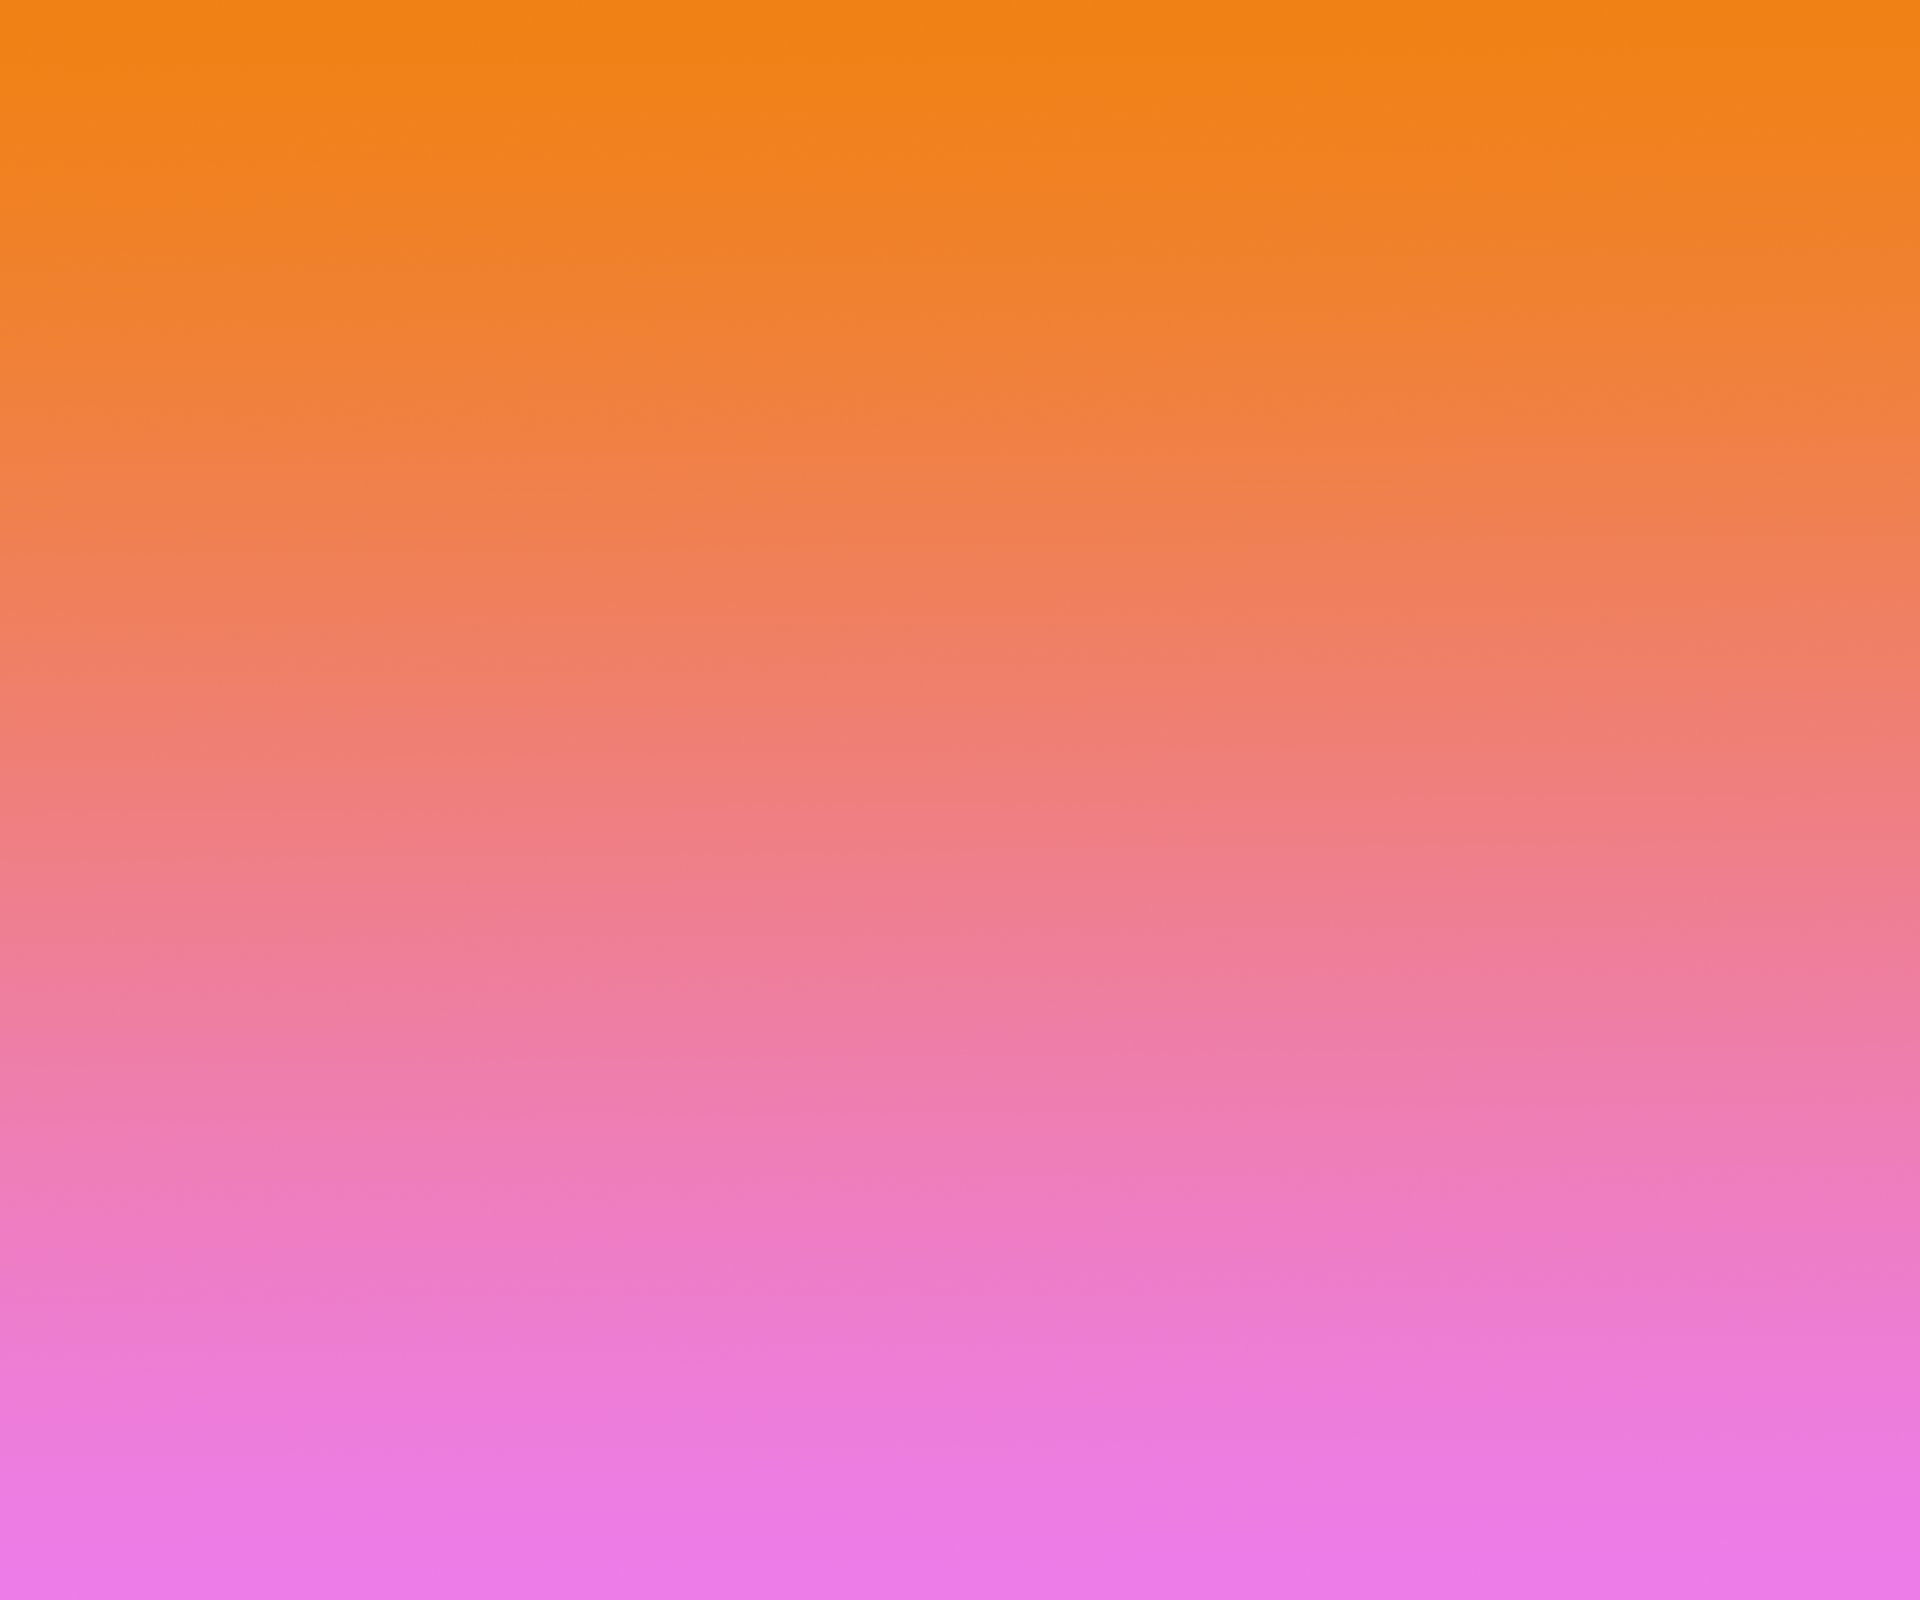 Pink Yellow And Orange Colors Defocused Abstract Smooth Background Wallpaper  Stock Photo  Download Image Now  iStock